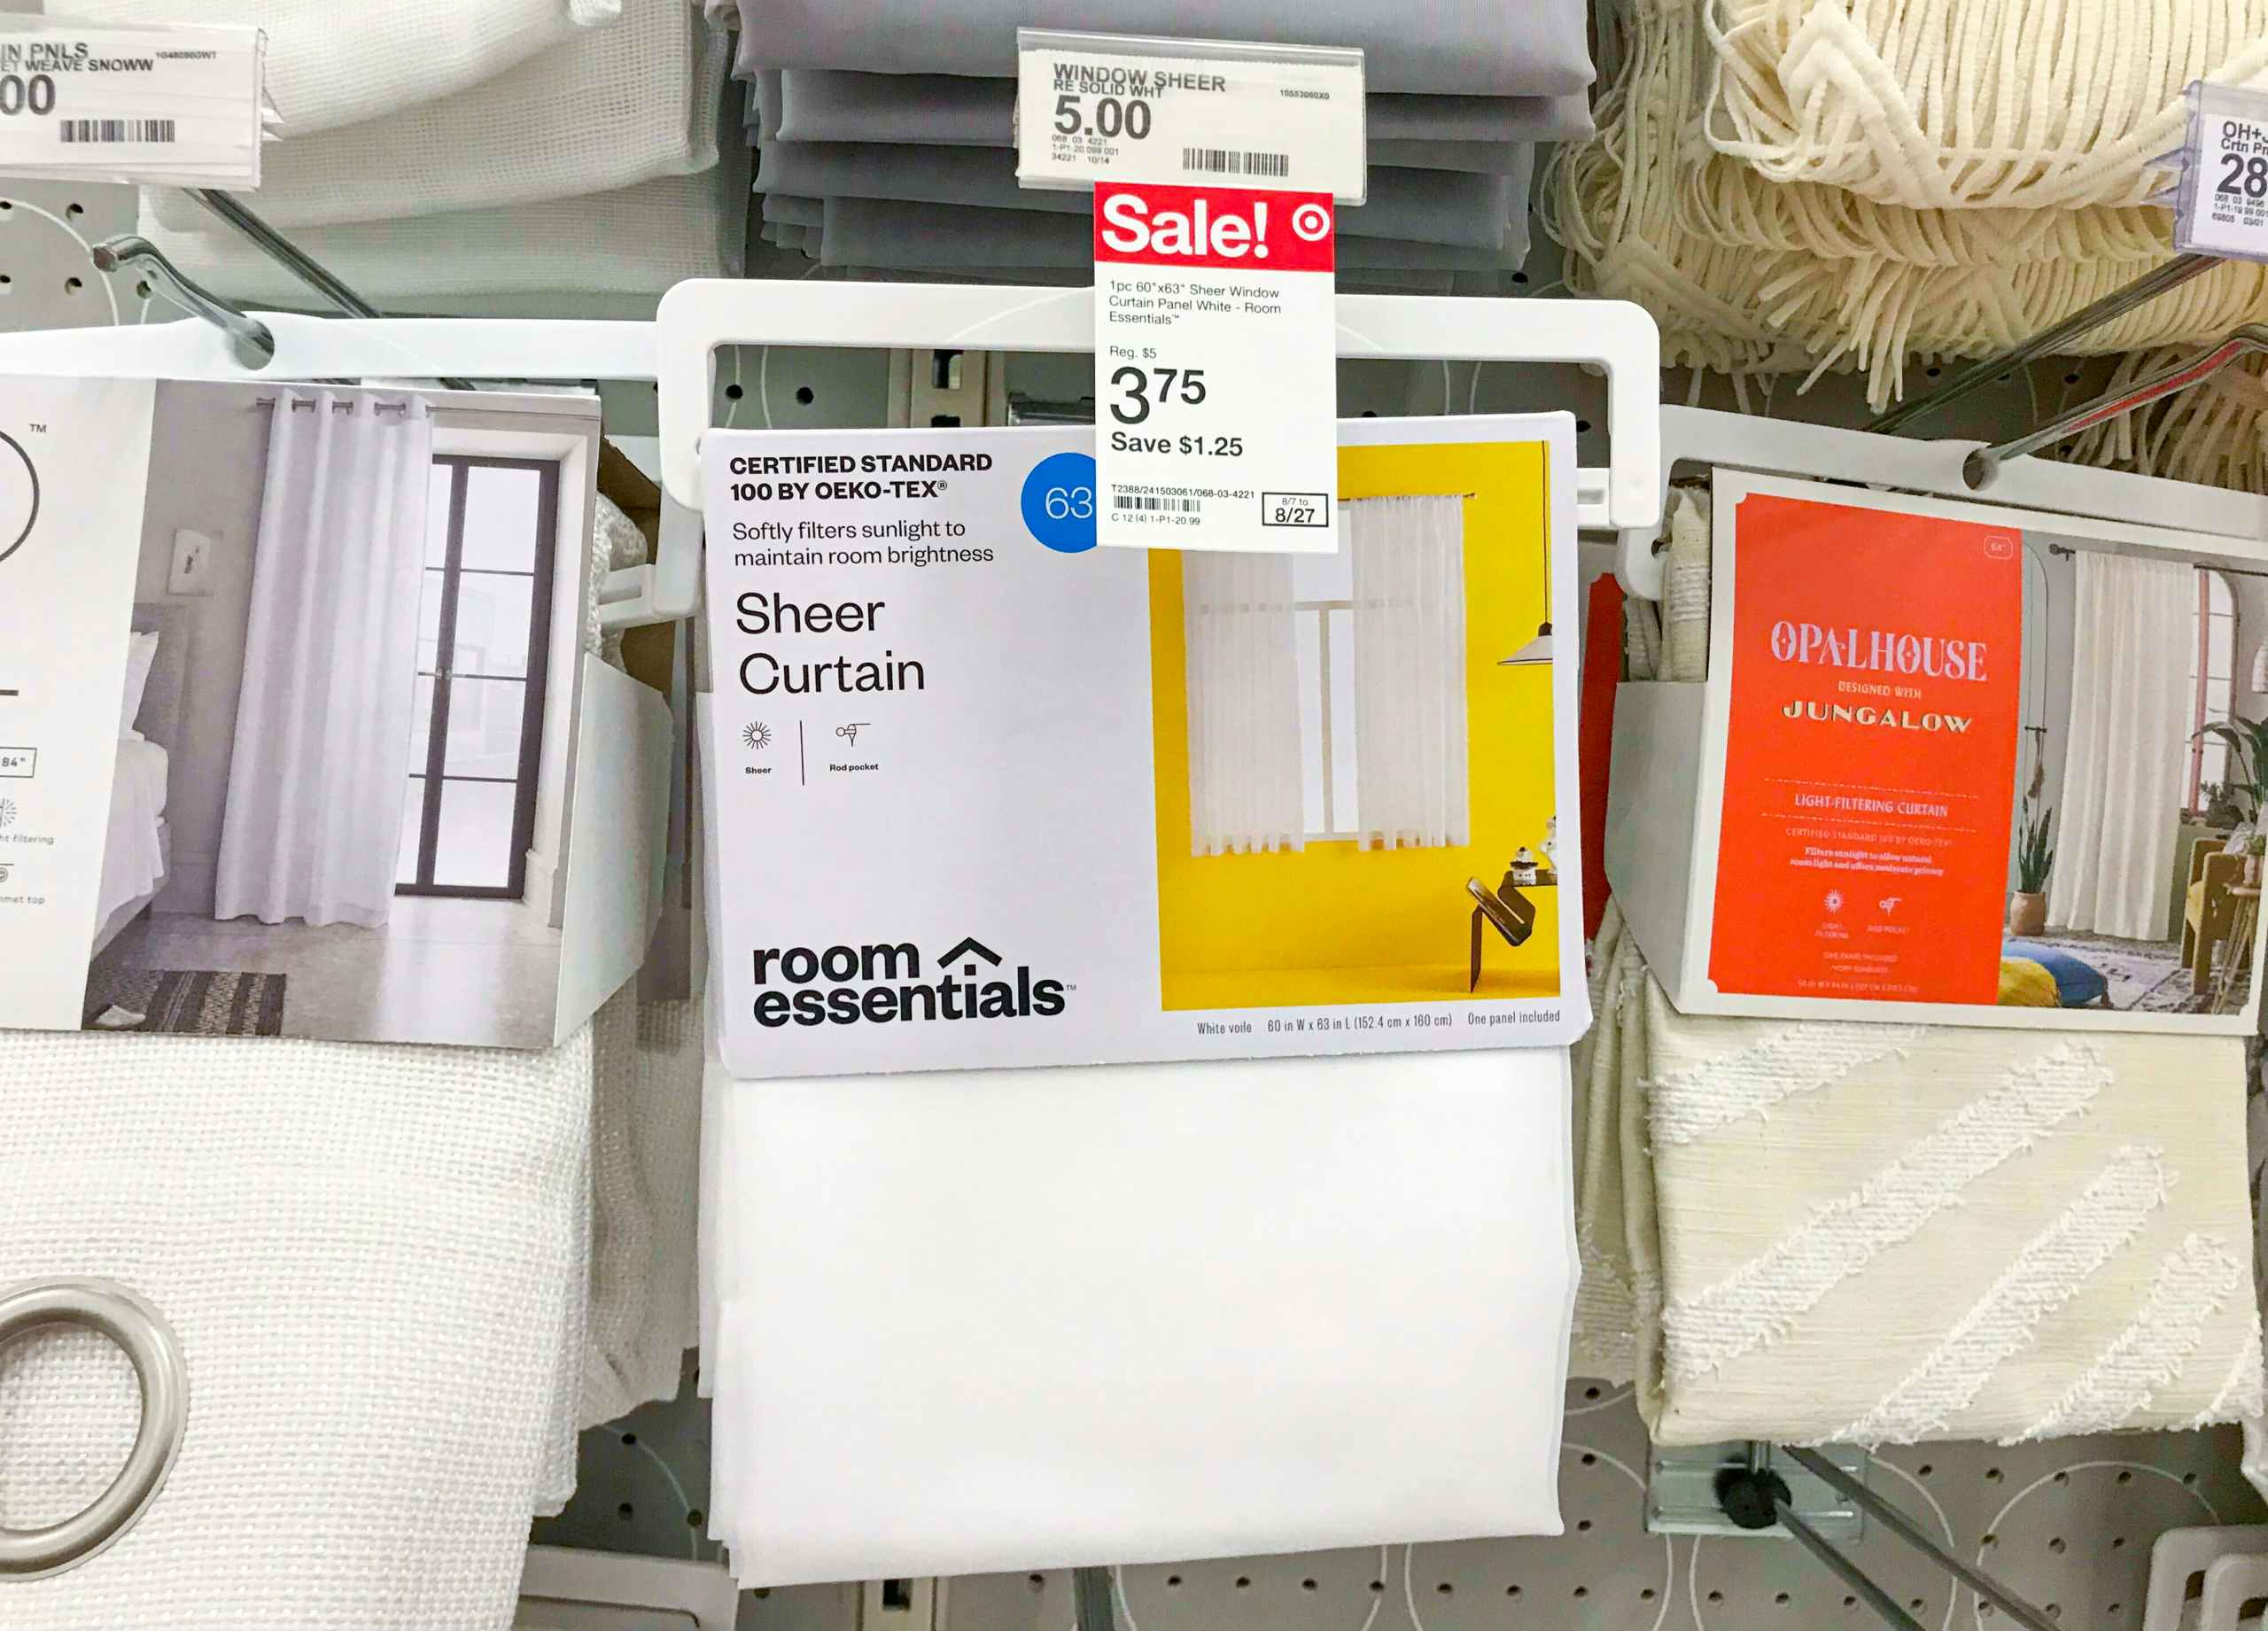 white Room Essentials sheer curtains on a Target shelf with sale price tag showing